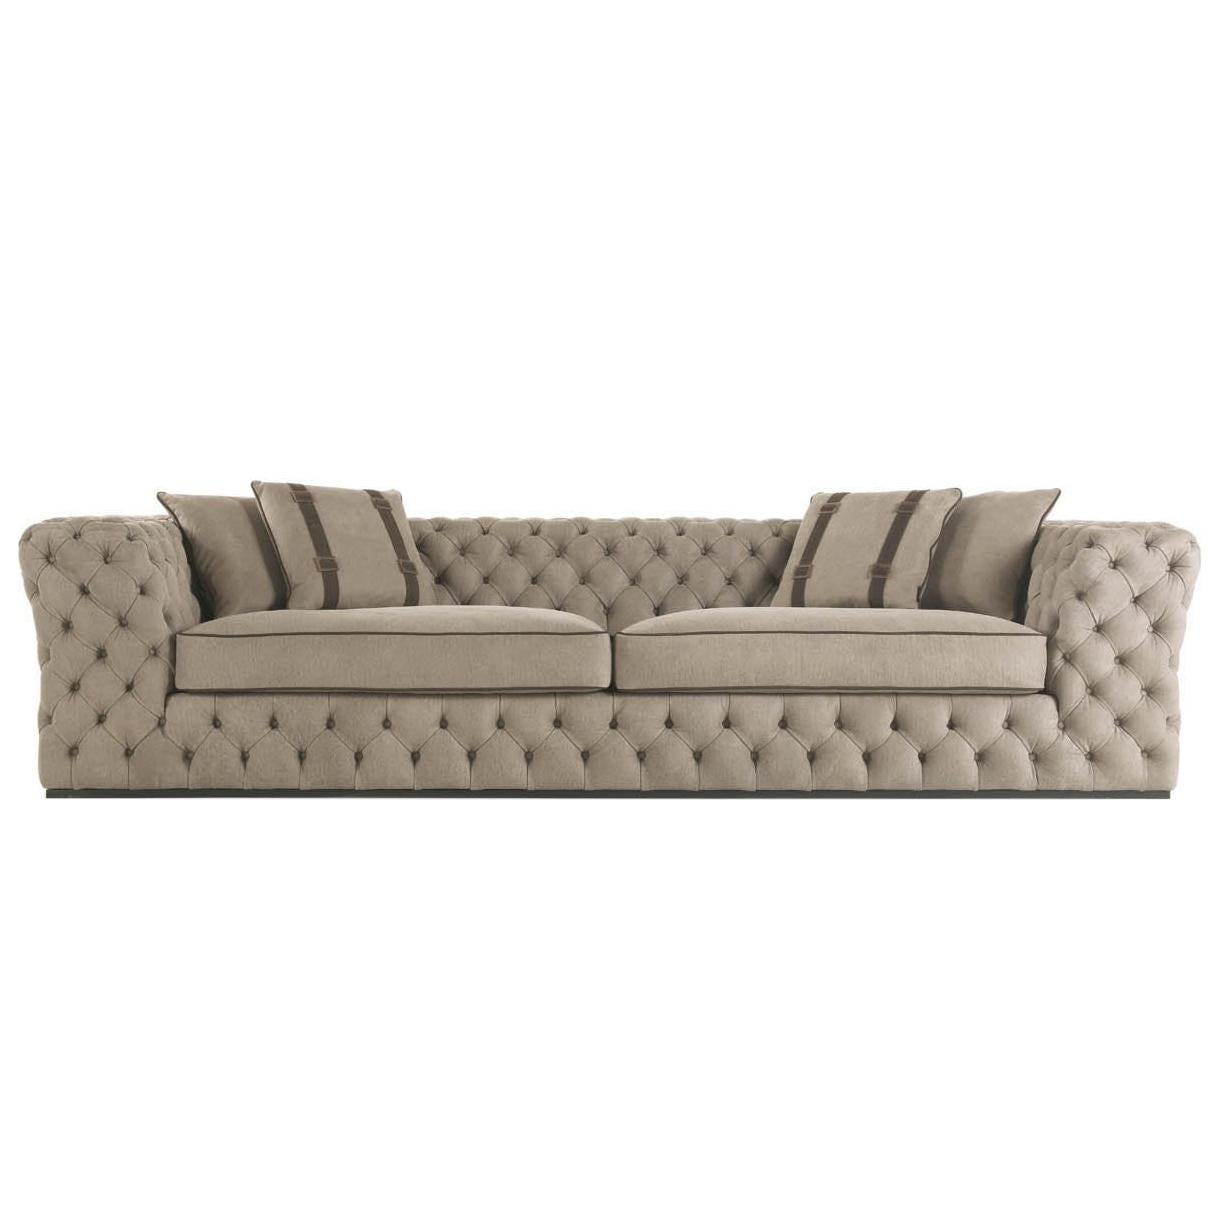 Gianfranco Ferre King's Cross Three-Seat Sofa in Beige Leather For Sale